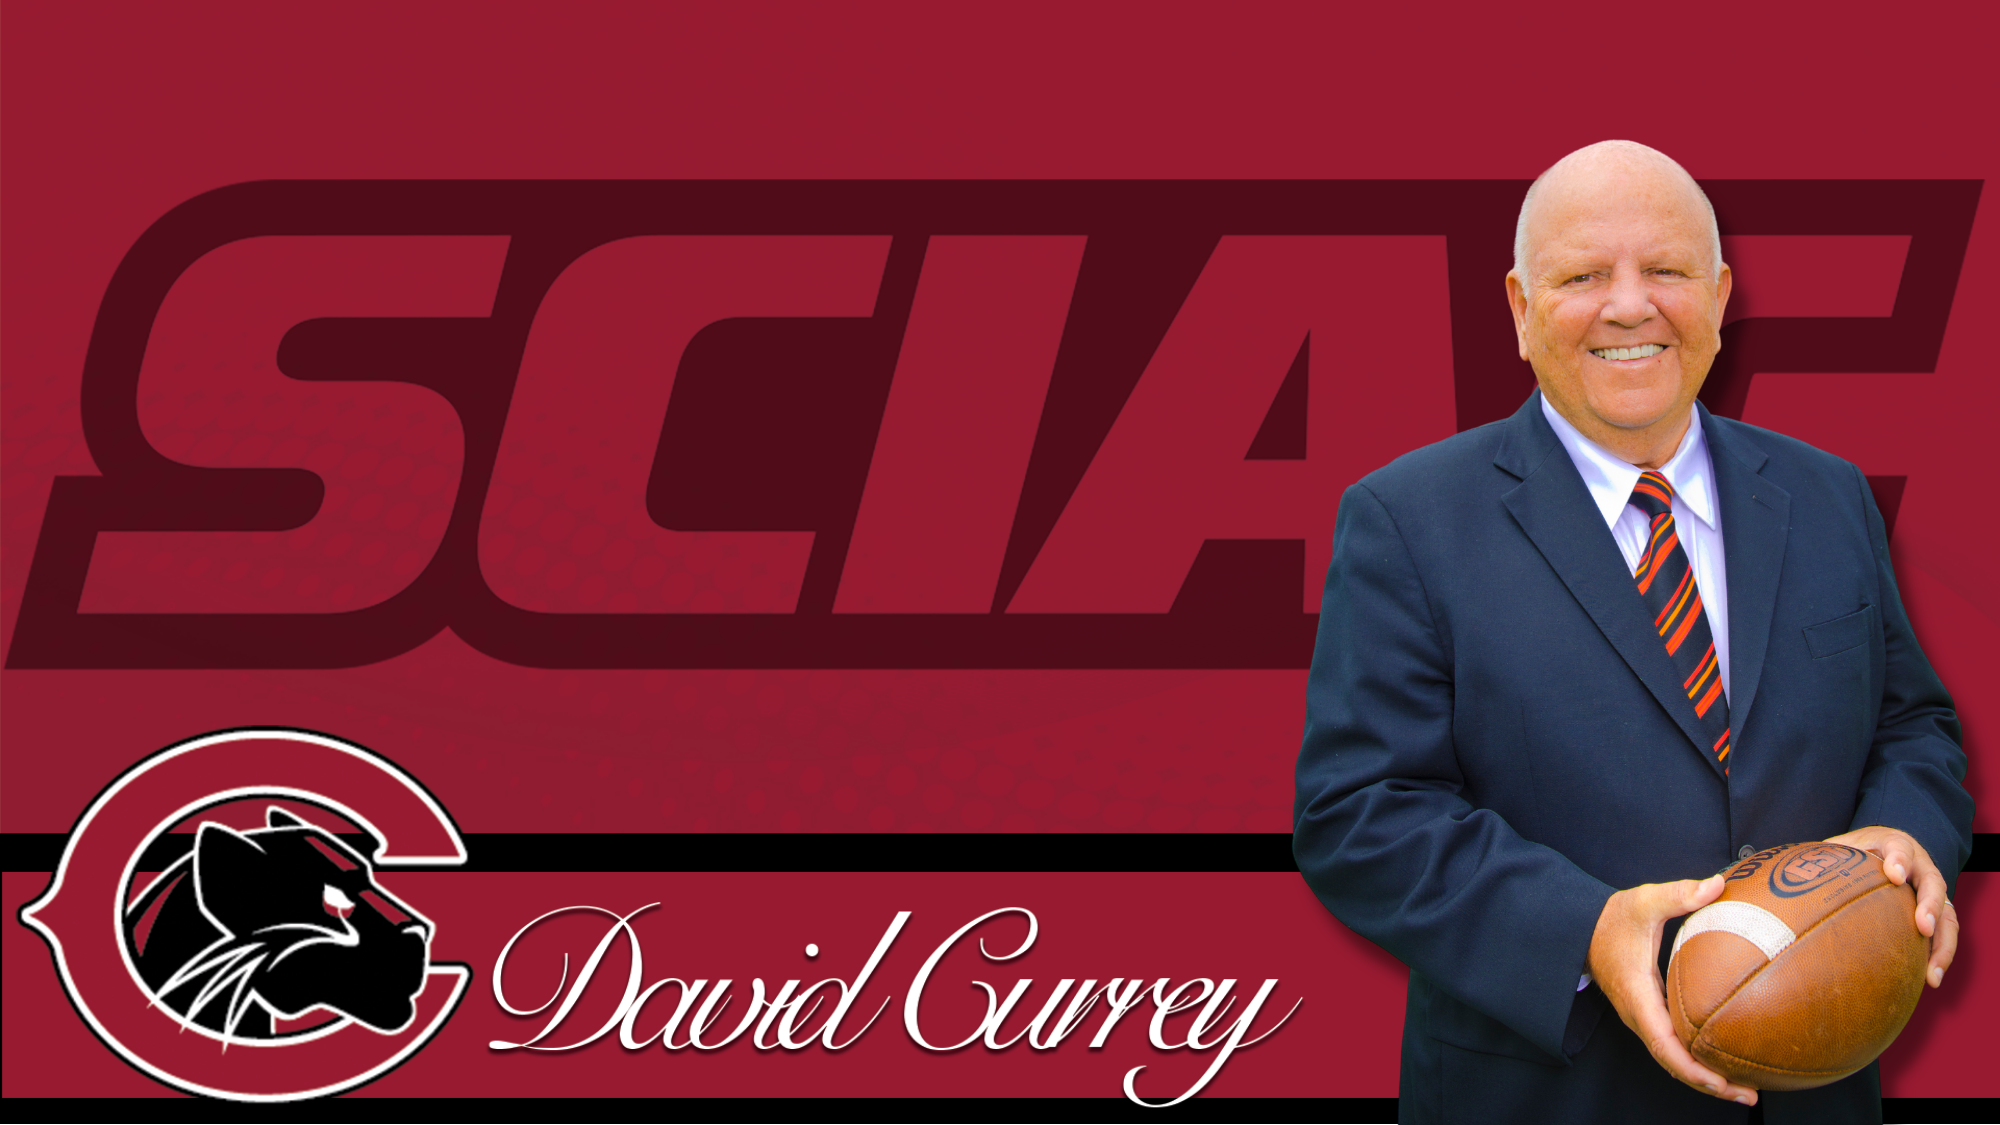 A red graphic honoring David Currey.